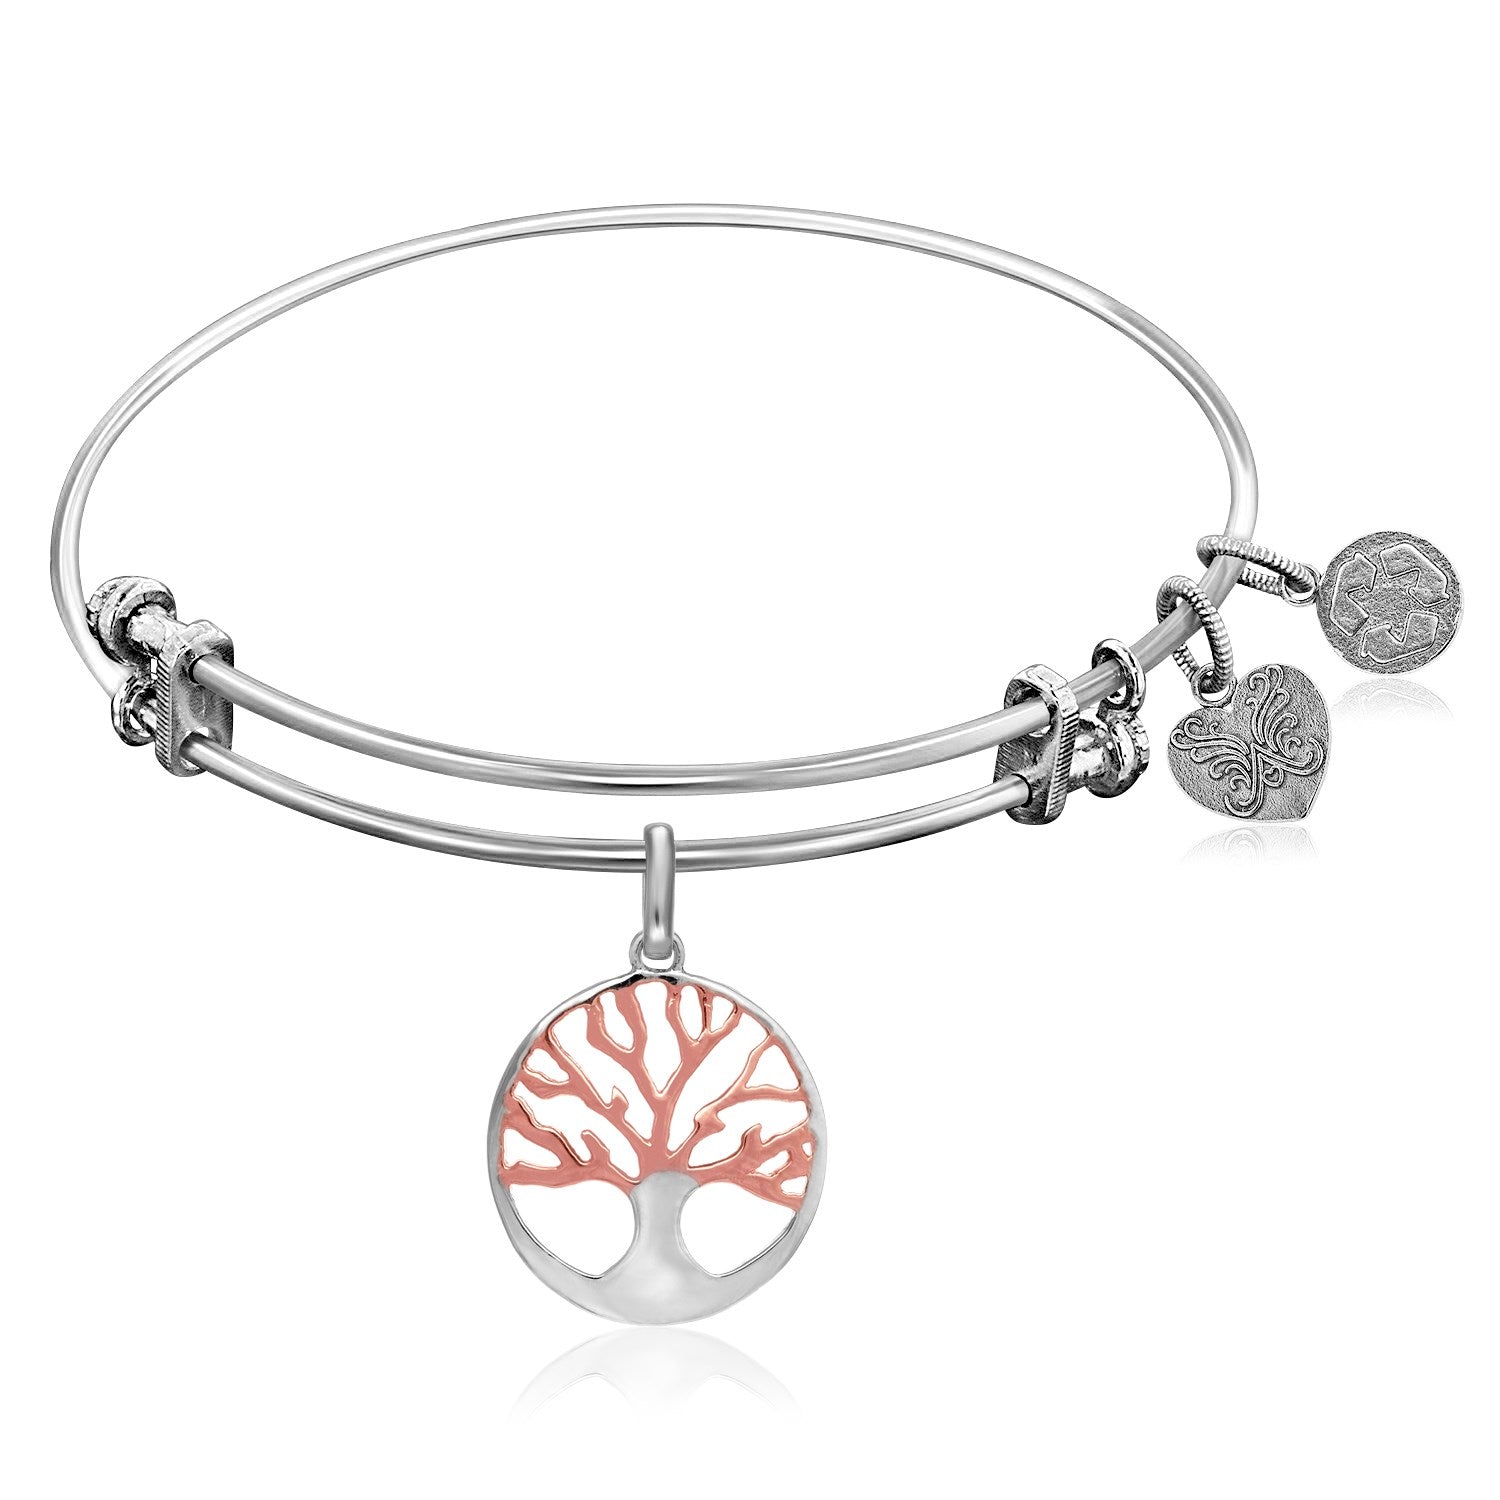 Expandable White Tone Brass Bangle with Pink and White Tone Tree of Life Symbol